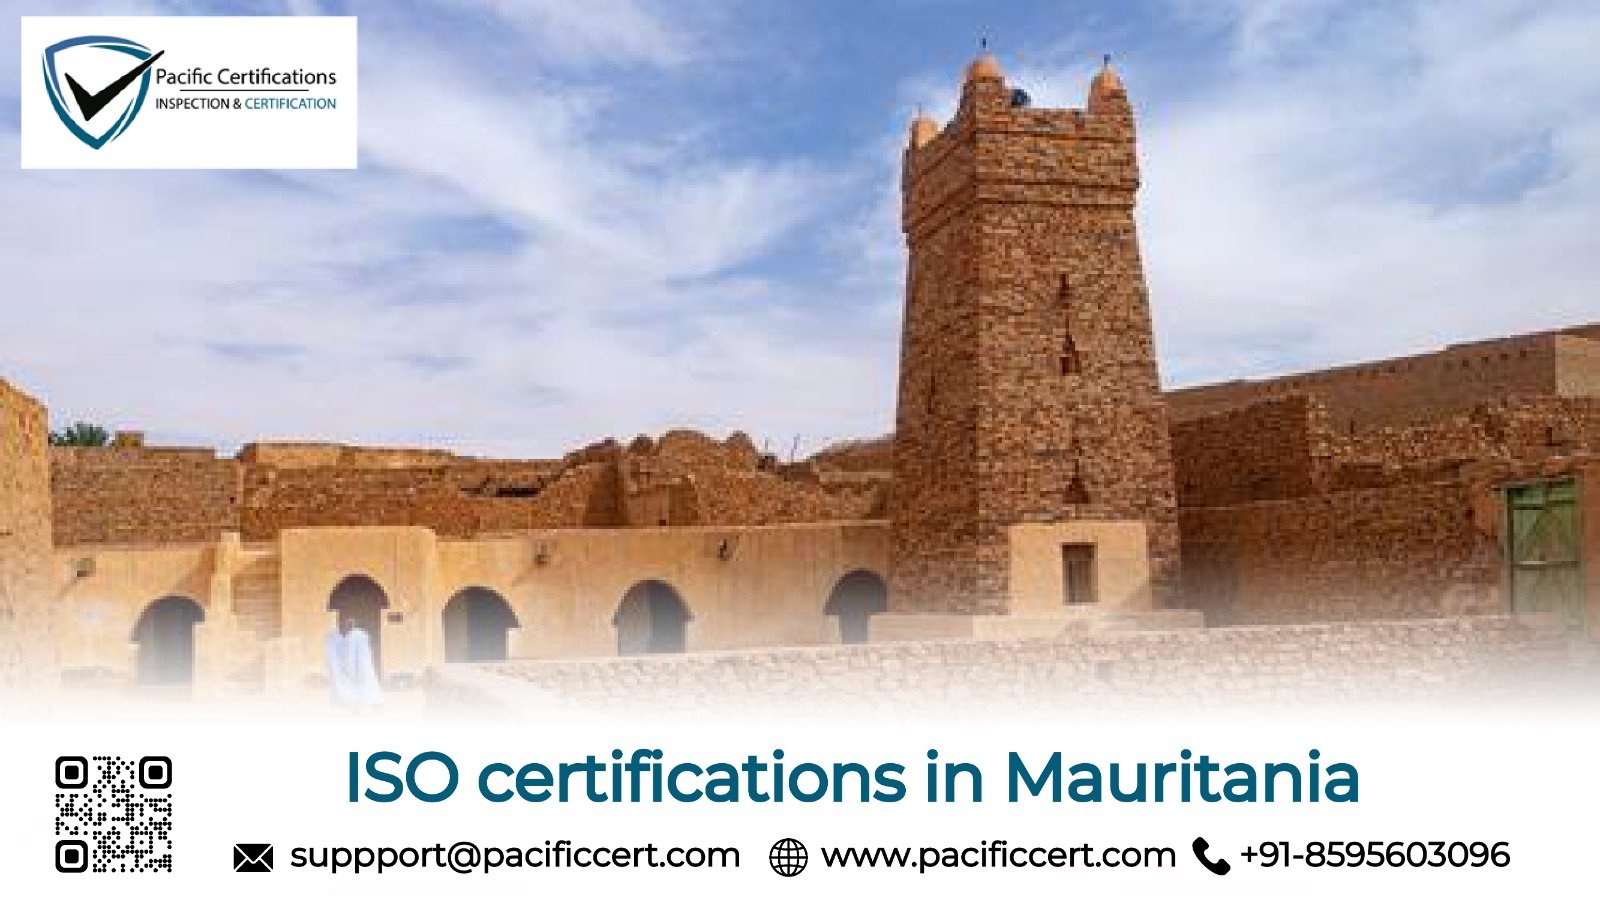 ISO Certifications in Mauritania and How Pacific Certifications can help